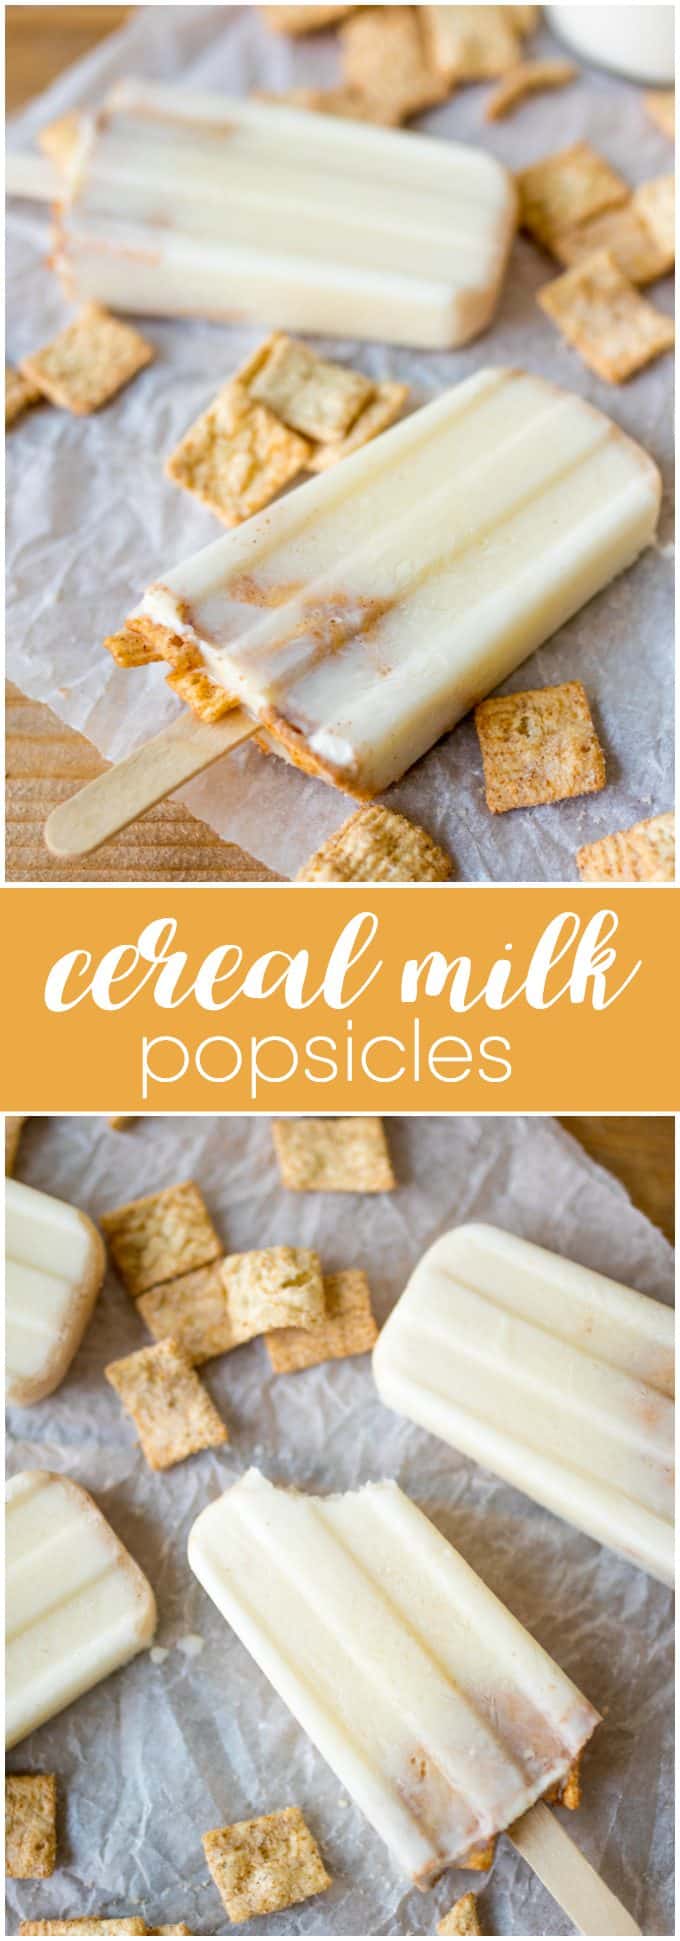 Cereal Milk Popsicles - Jump on this tasty trend! Infuse your breakfast favorites into your desserts with these creamy popsicles!